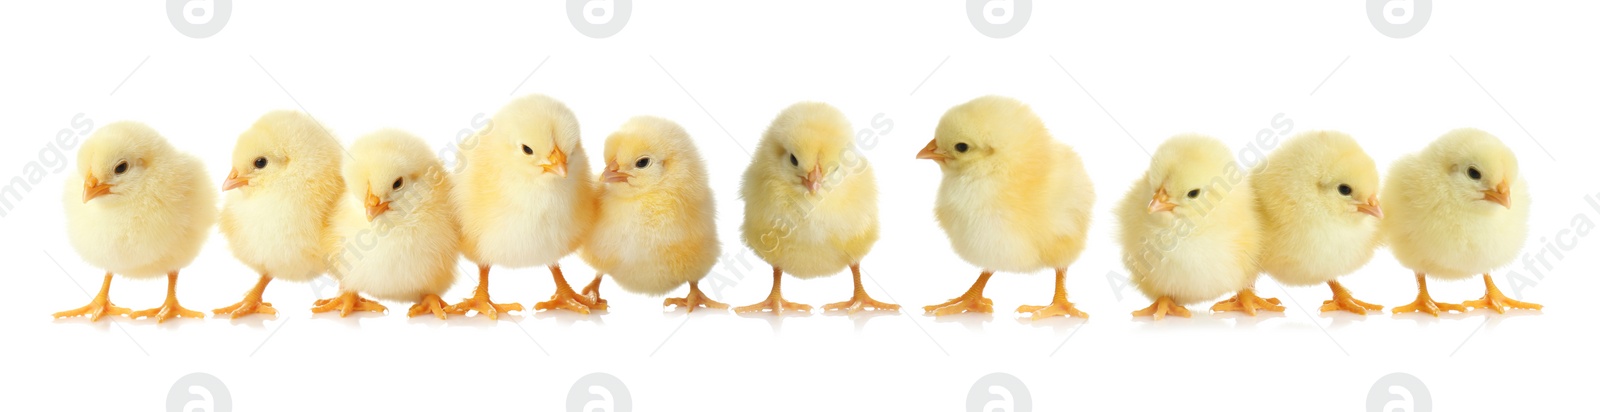 Image of Collage with cute fluffy chickens on white background, banner design. Farm animals